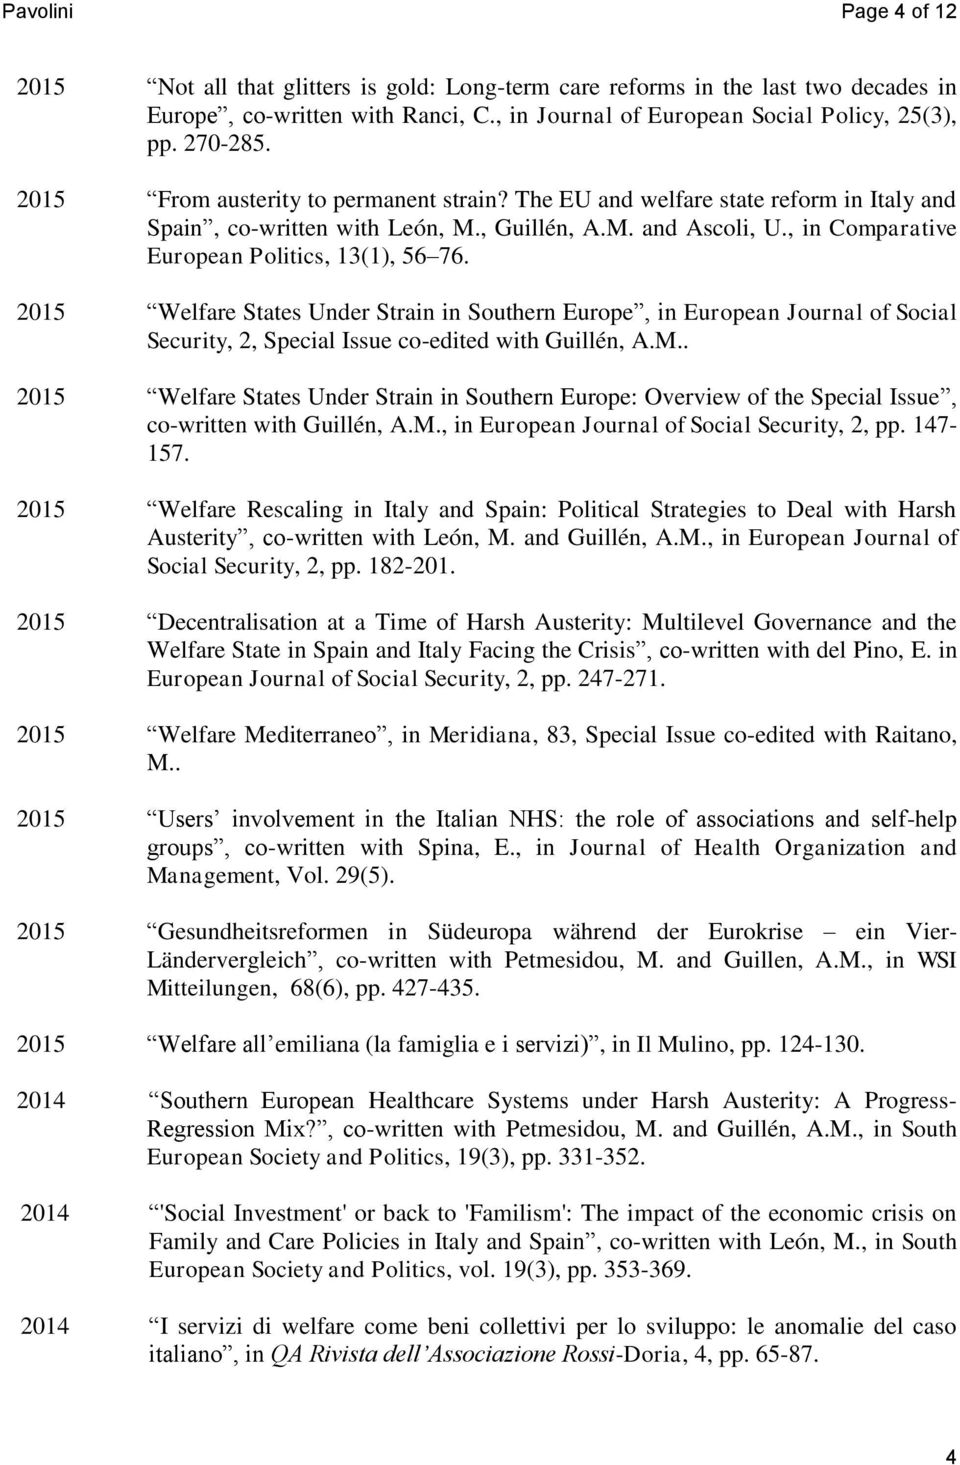 2015 Welfare States Under Strain in Southern Europe, in European Journal of Social Security, 2, Special Issue co-edited with Guillén, A.M.